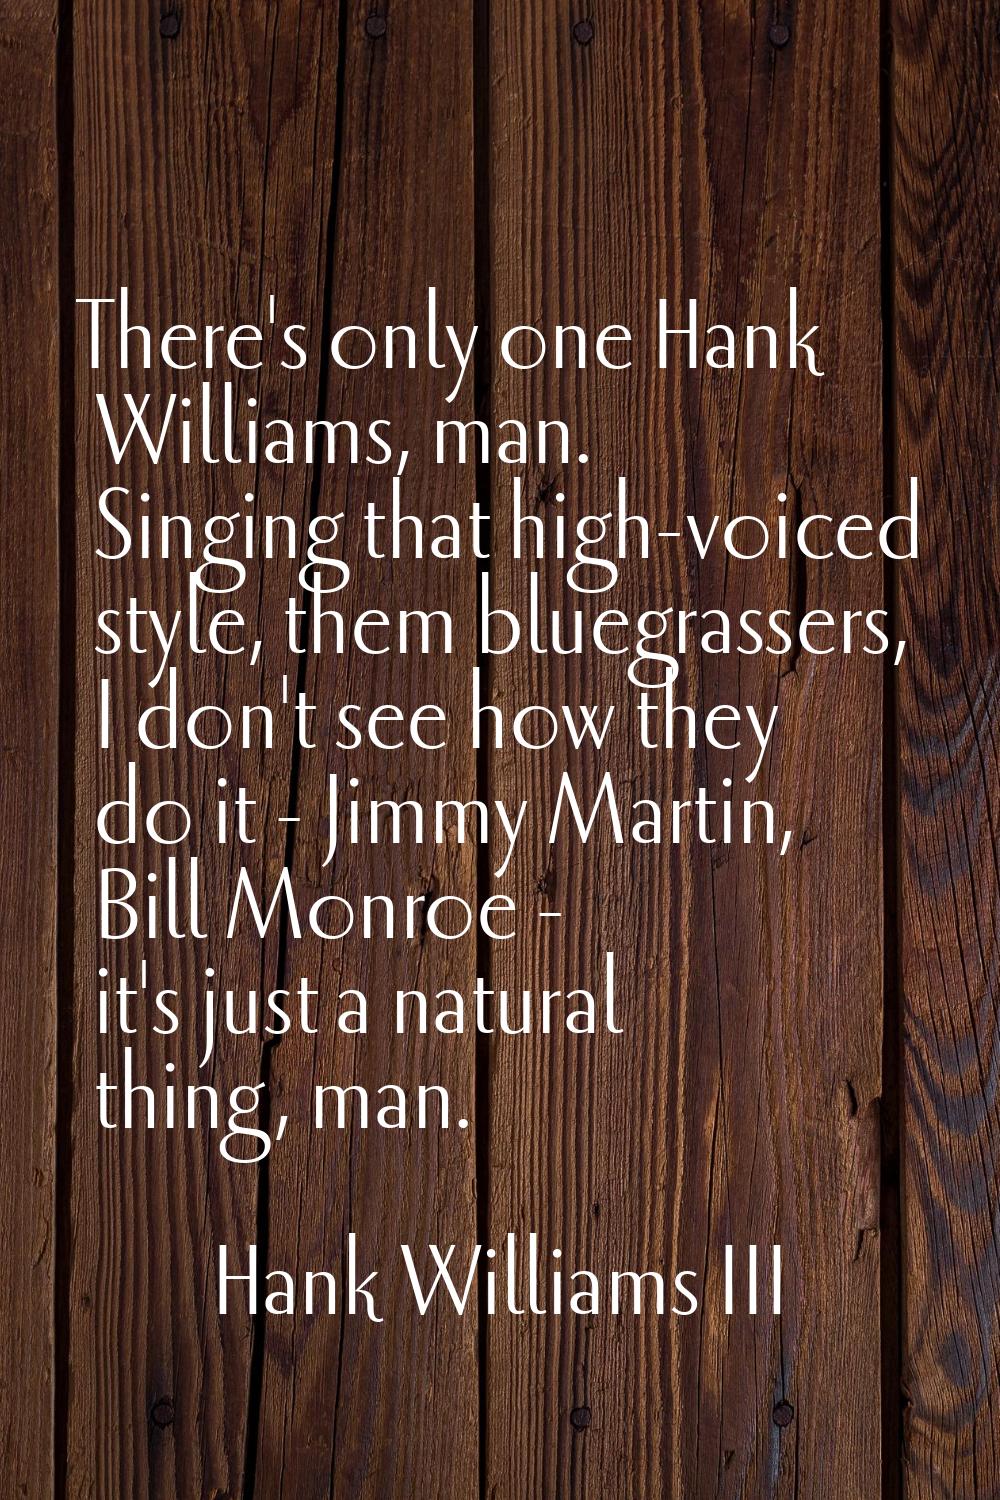 There's only one Hank Williams, man. Singing that high-voiced style, them bluegrassers, I don't see